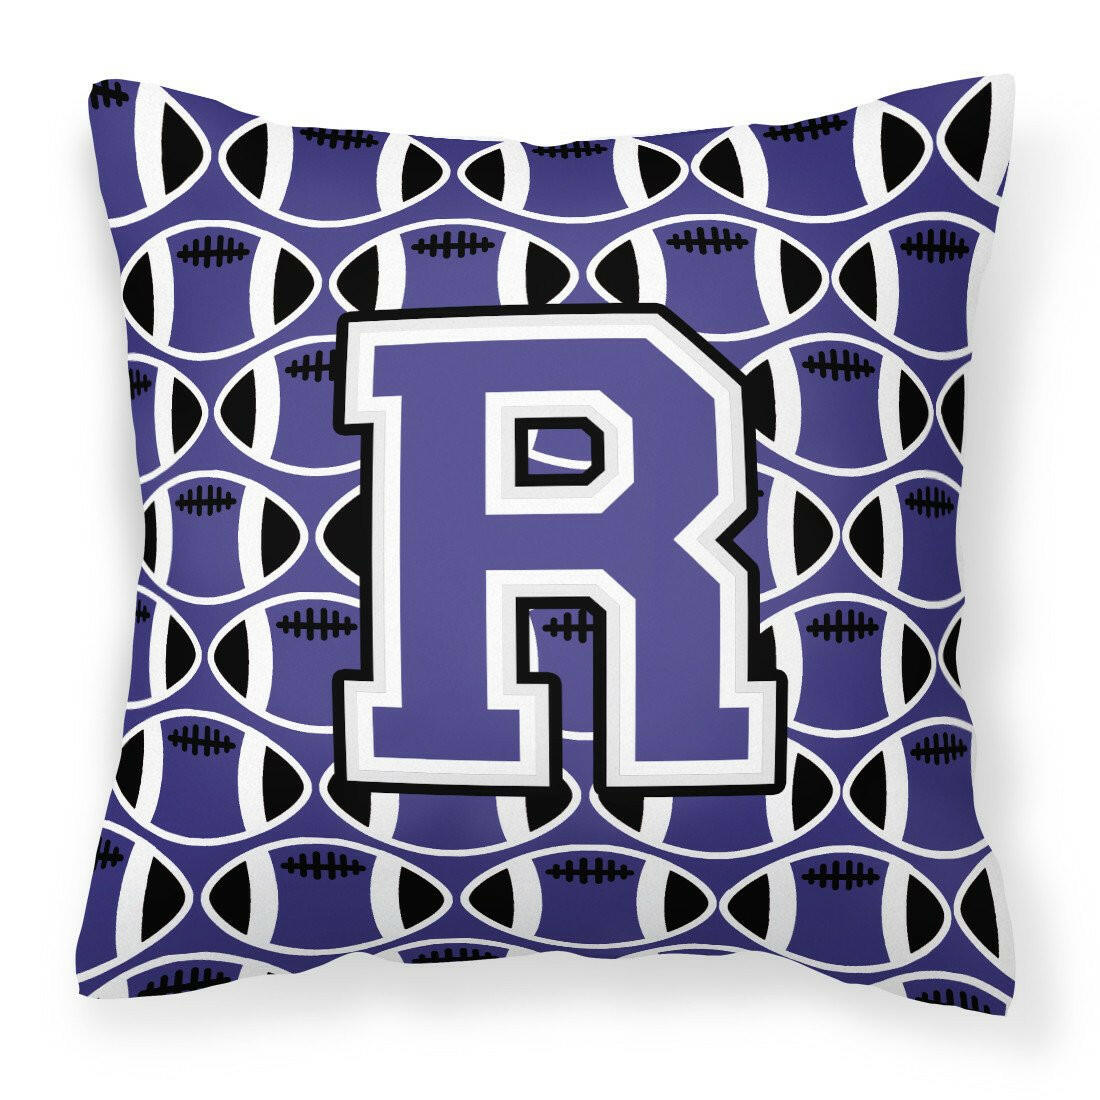 Letter R Football Purple and White Fabric Decorative Pillow CJ1068-RPW1414 by Caroline's Treasures